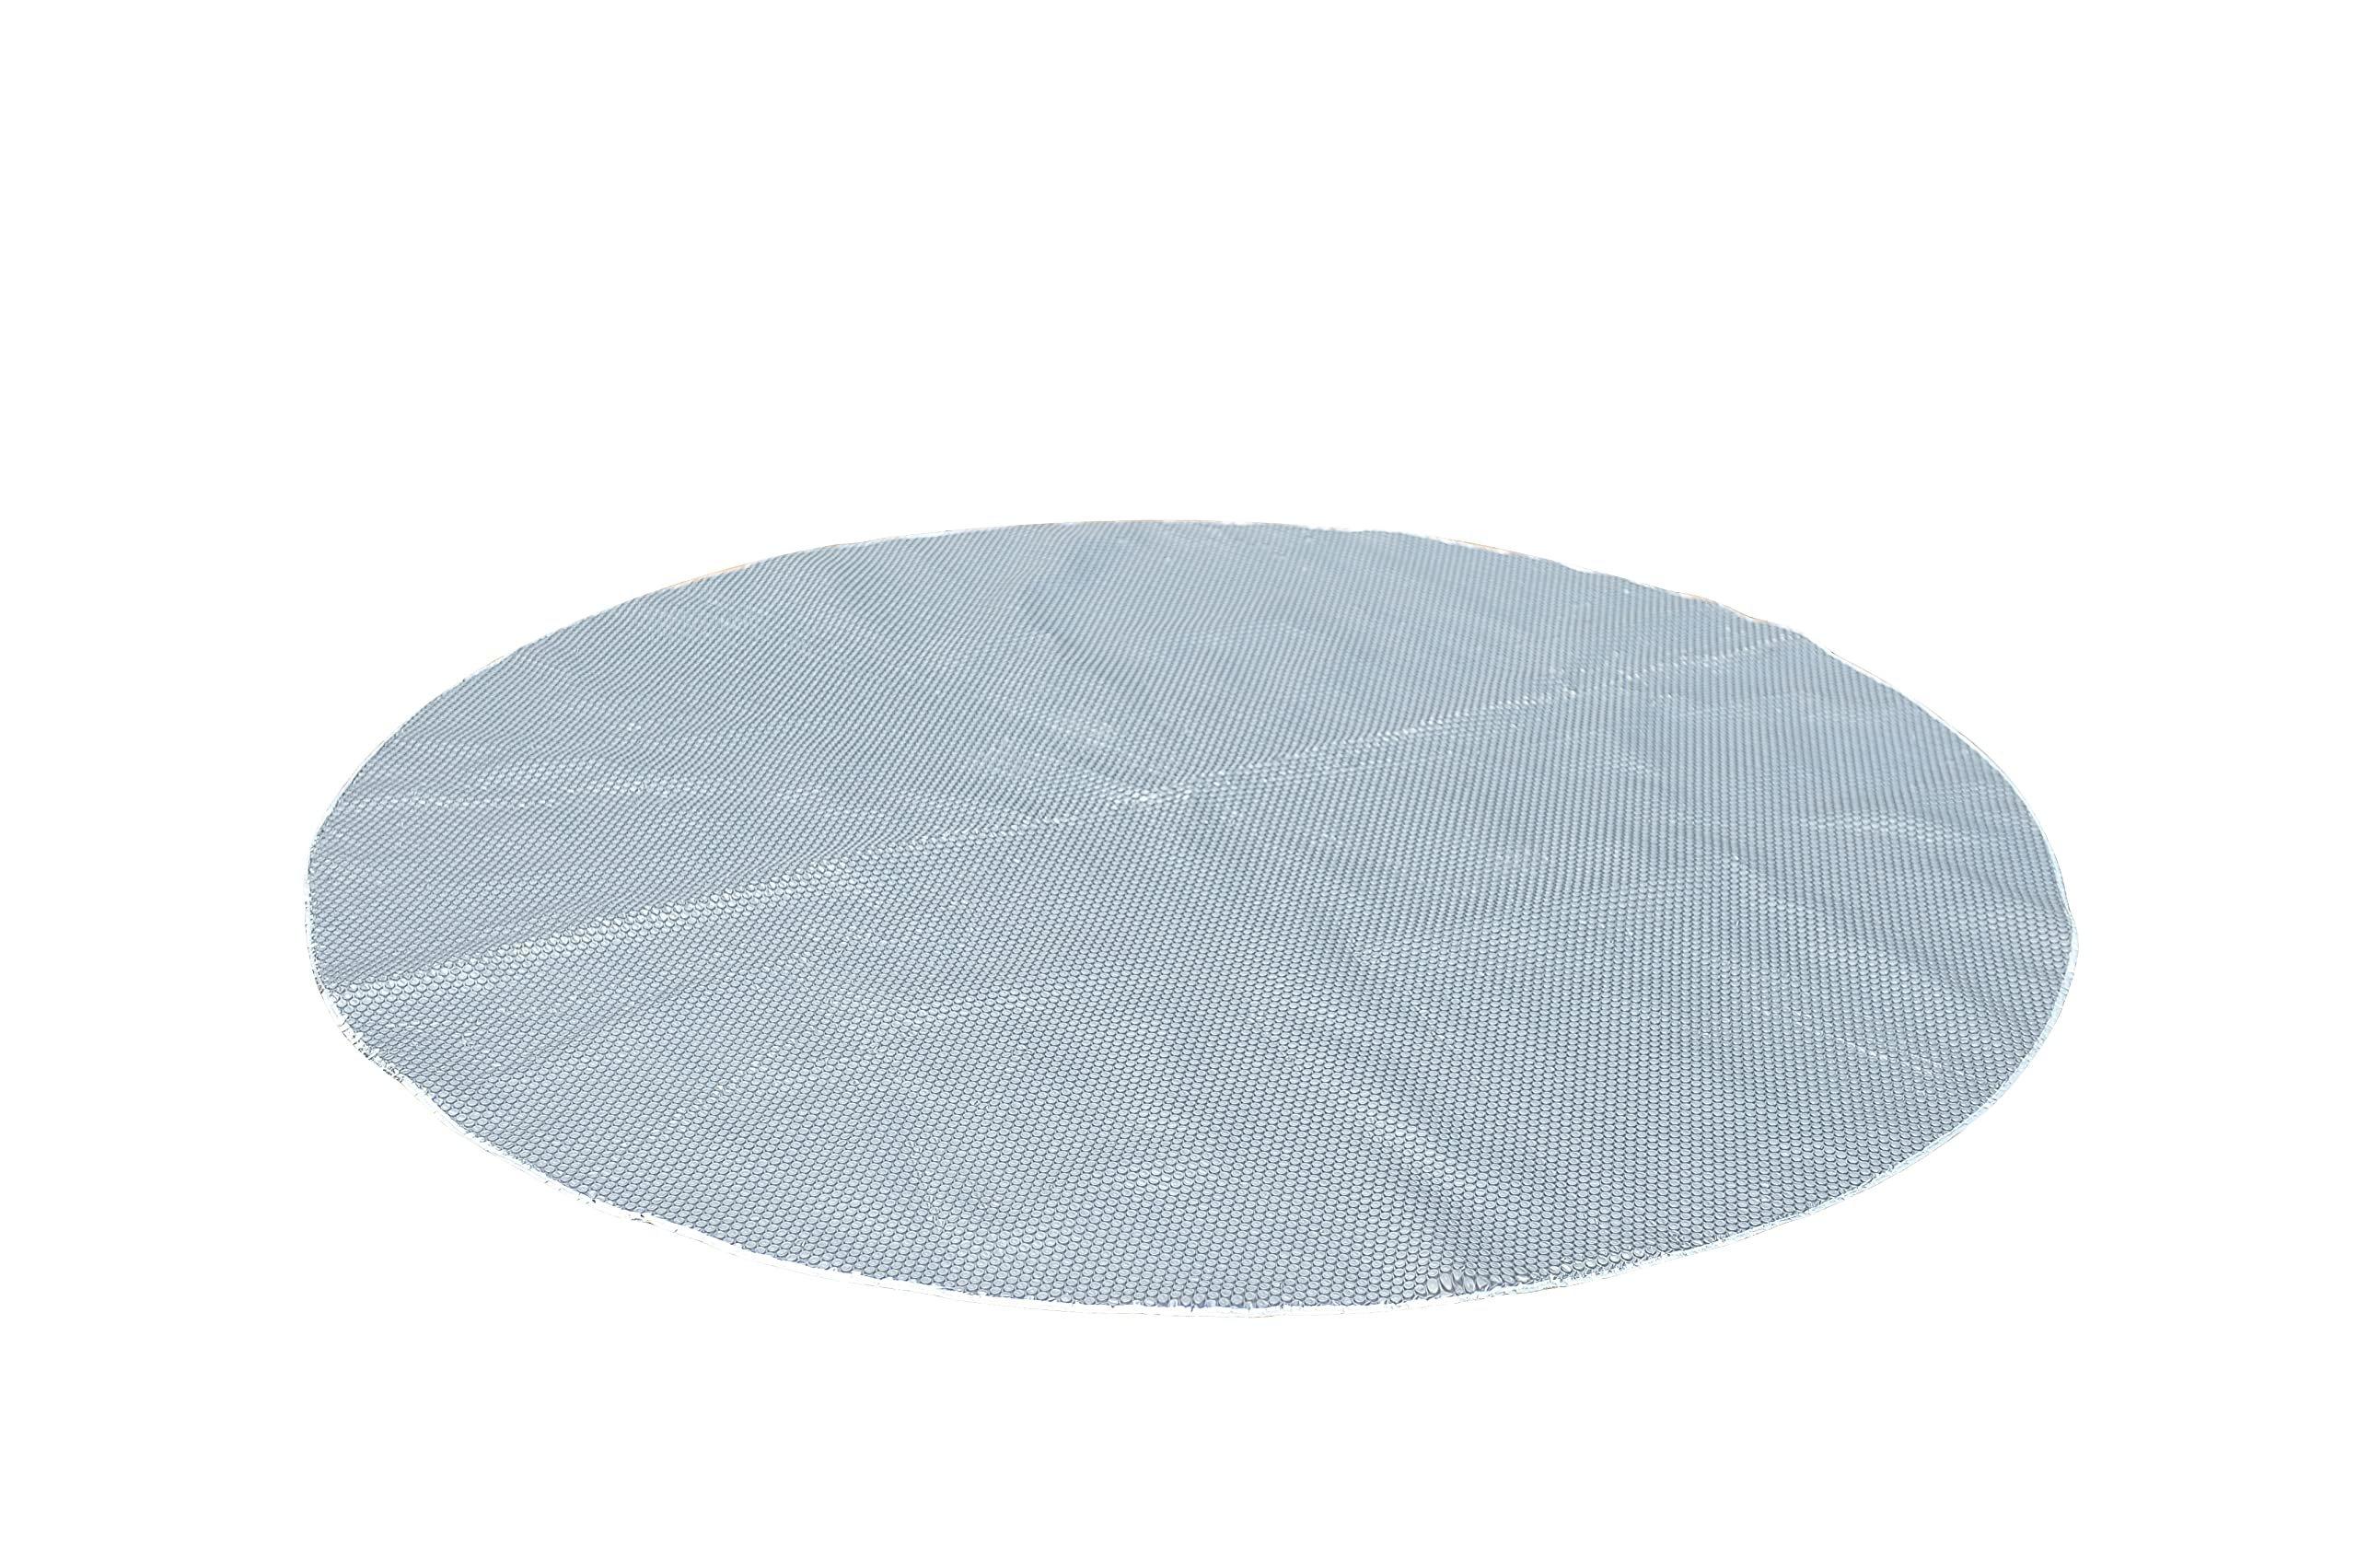 Mspa  200cm Round 6 Person Bubble Mat Heat Preservation Energy Saving Spa Hot Tub Accessories